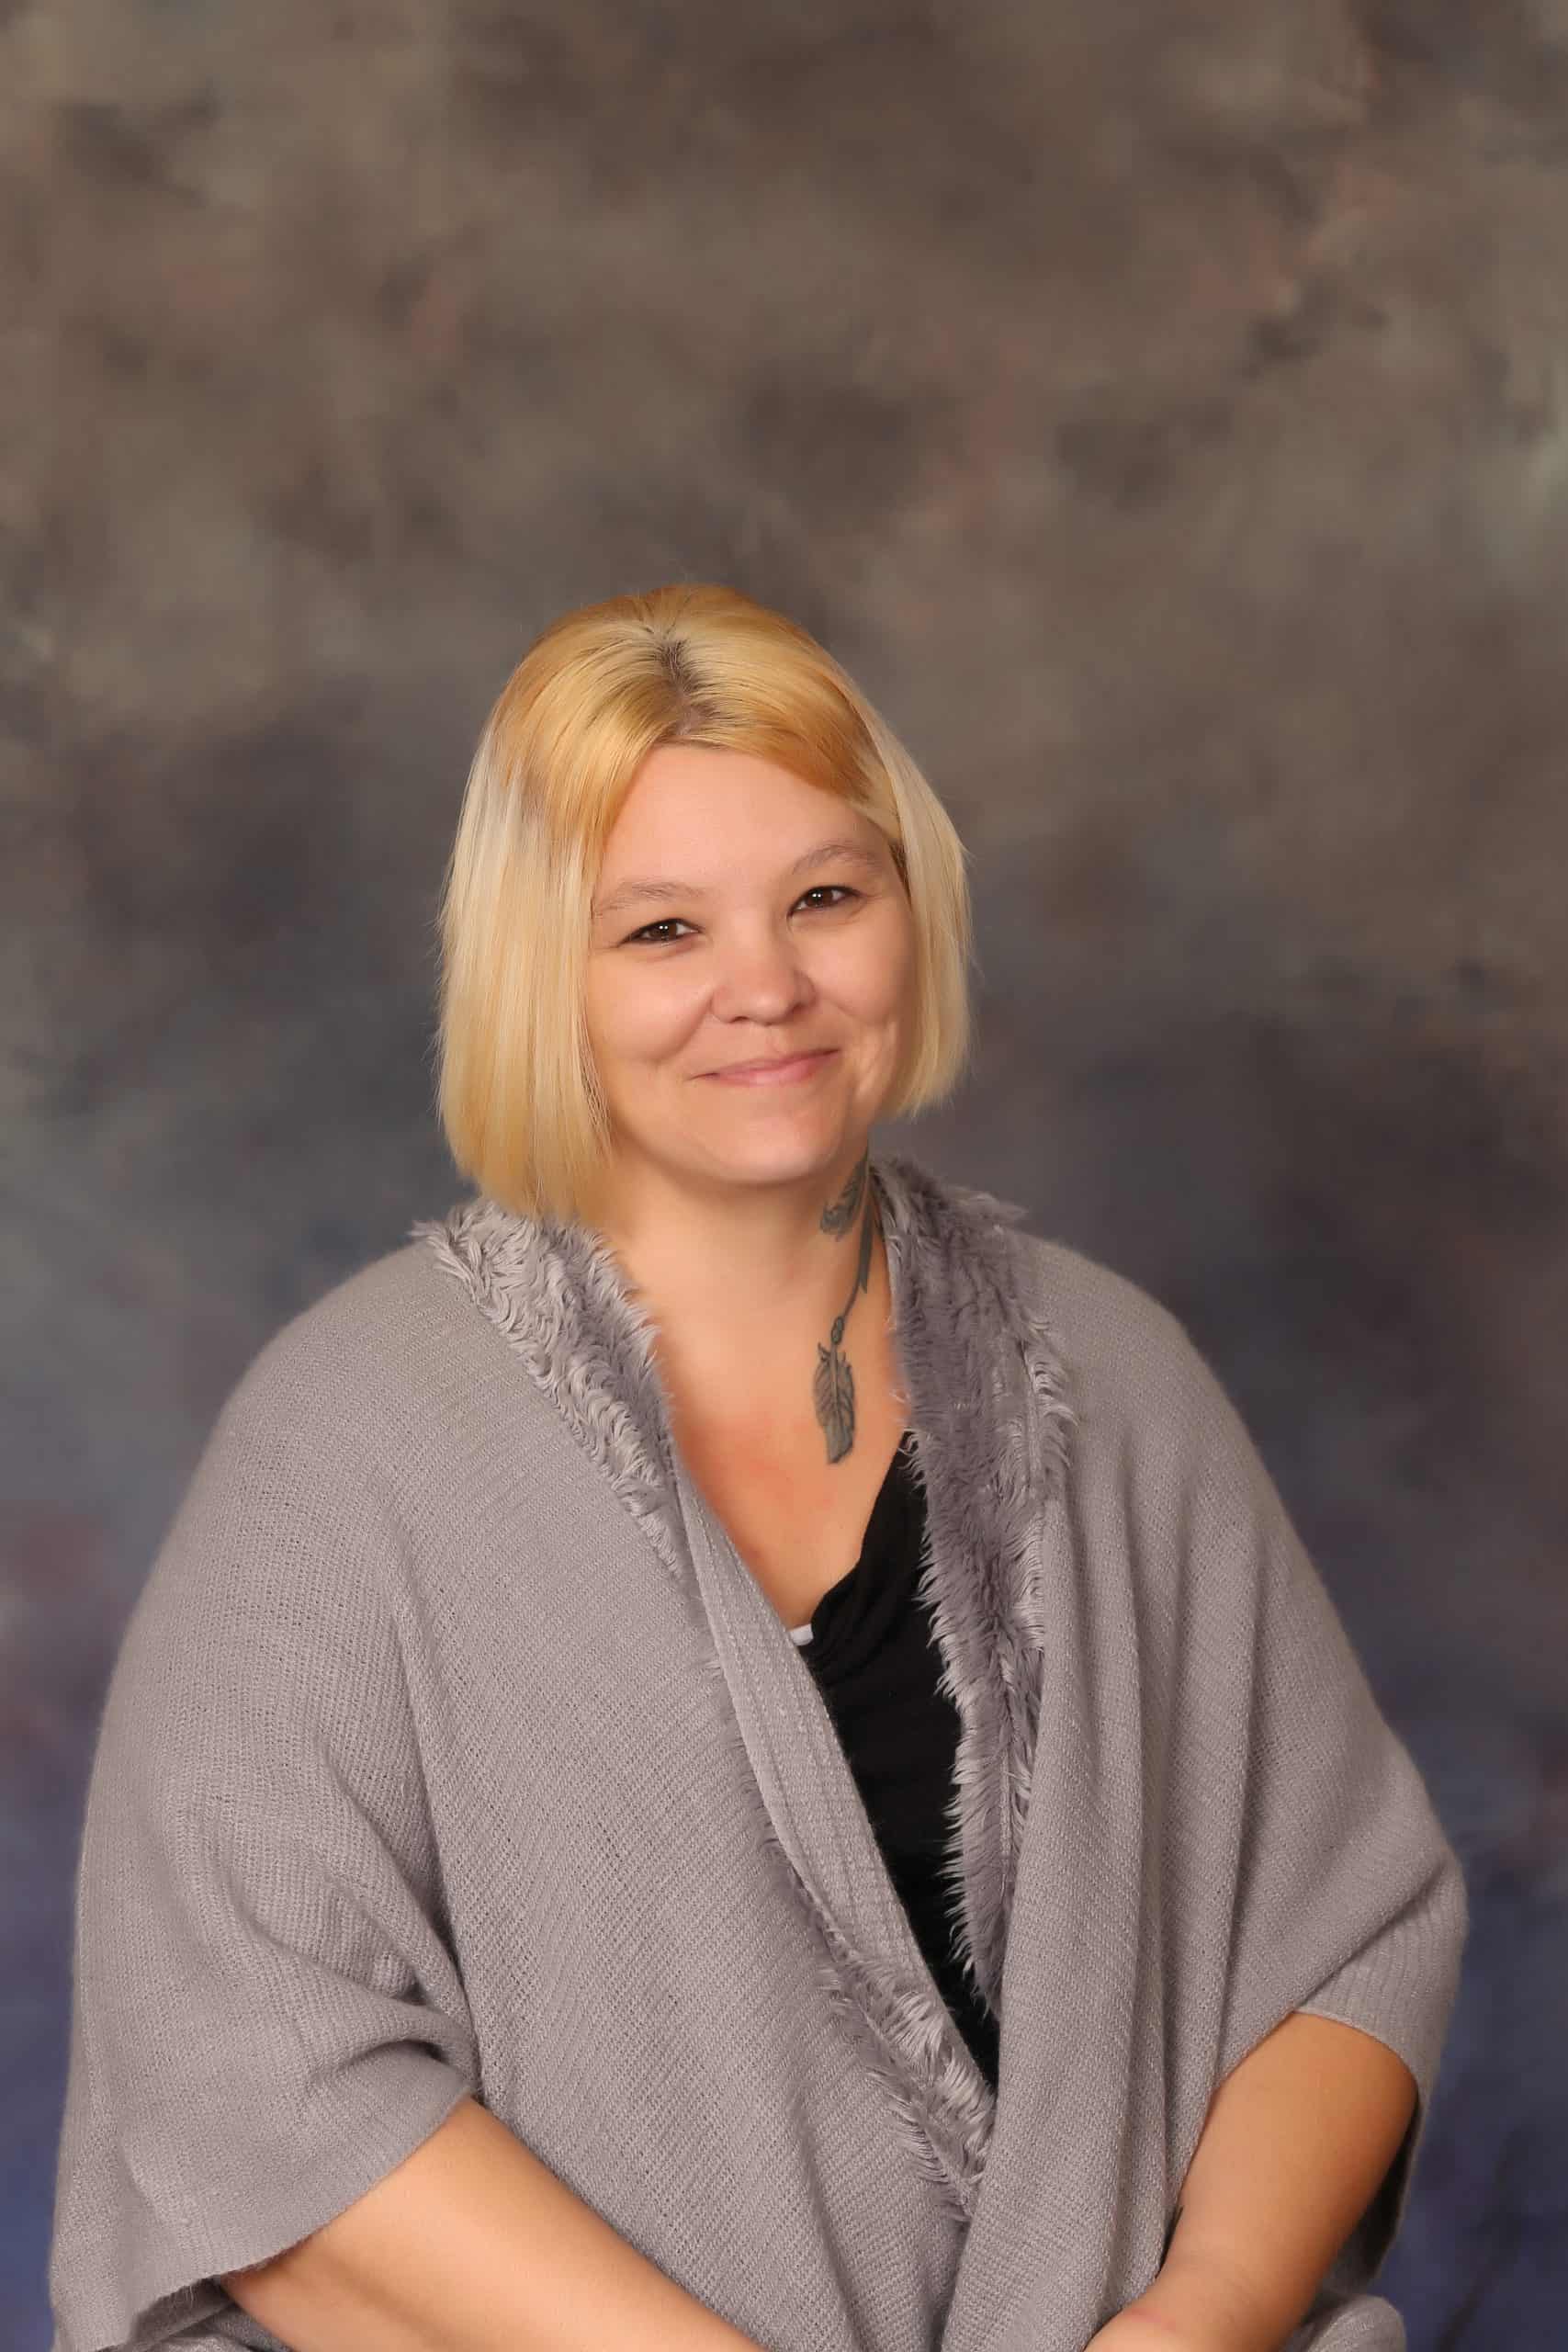 Photo of Lead Teacher Rhonda Coleman. She is a Caucasian woman with blonde hair, and wears a black shirt and gray shawl.